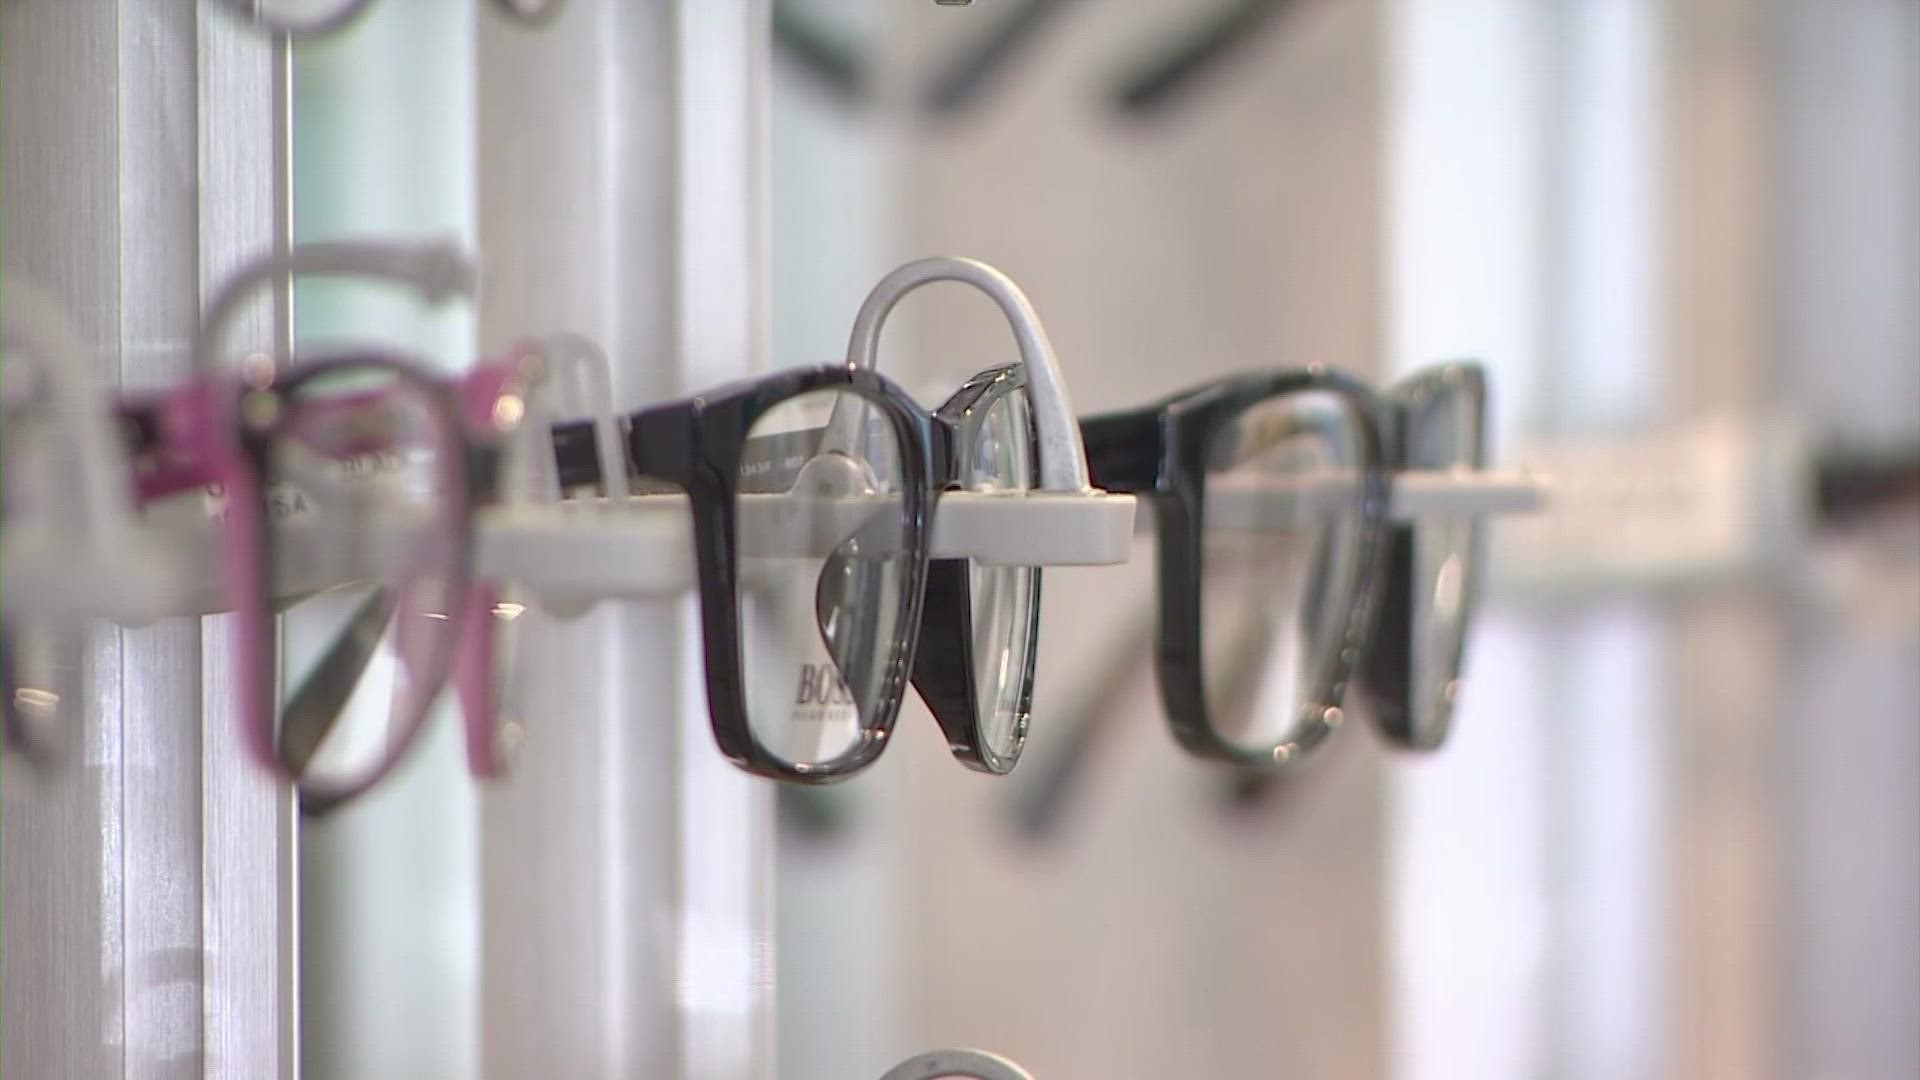 A Houston-area optometrist says criminals are targeting her business and others like it, going after high-end glasses.